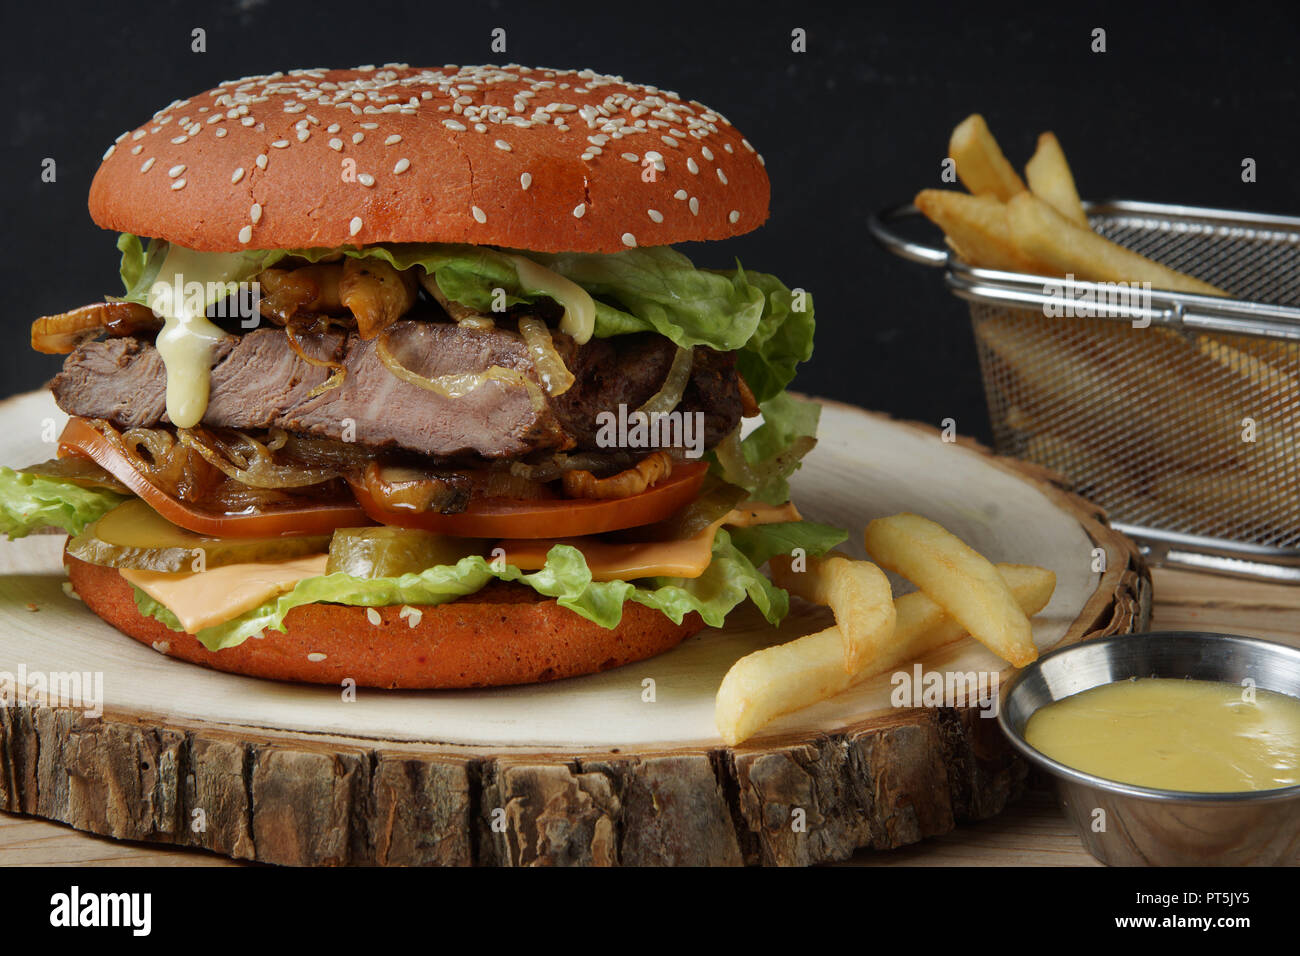 A large red burger with a piece of meat, tomatoes, pickled cucumbers, cheese, fried onion and lettuce, the sauce drains a large mouth-watering drop. Stock Photo